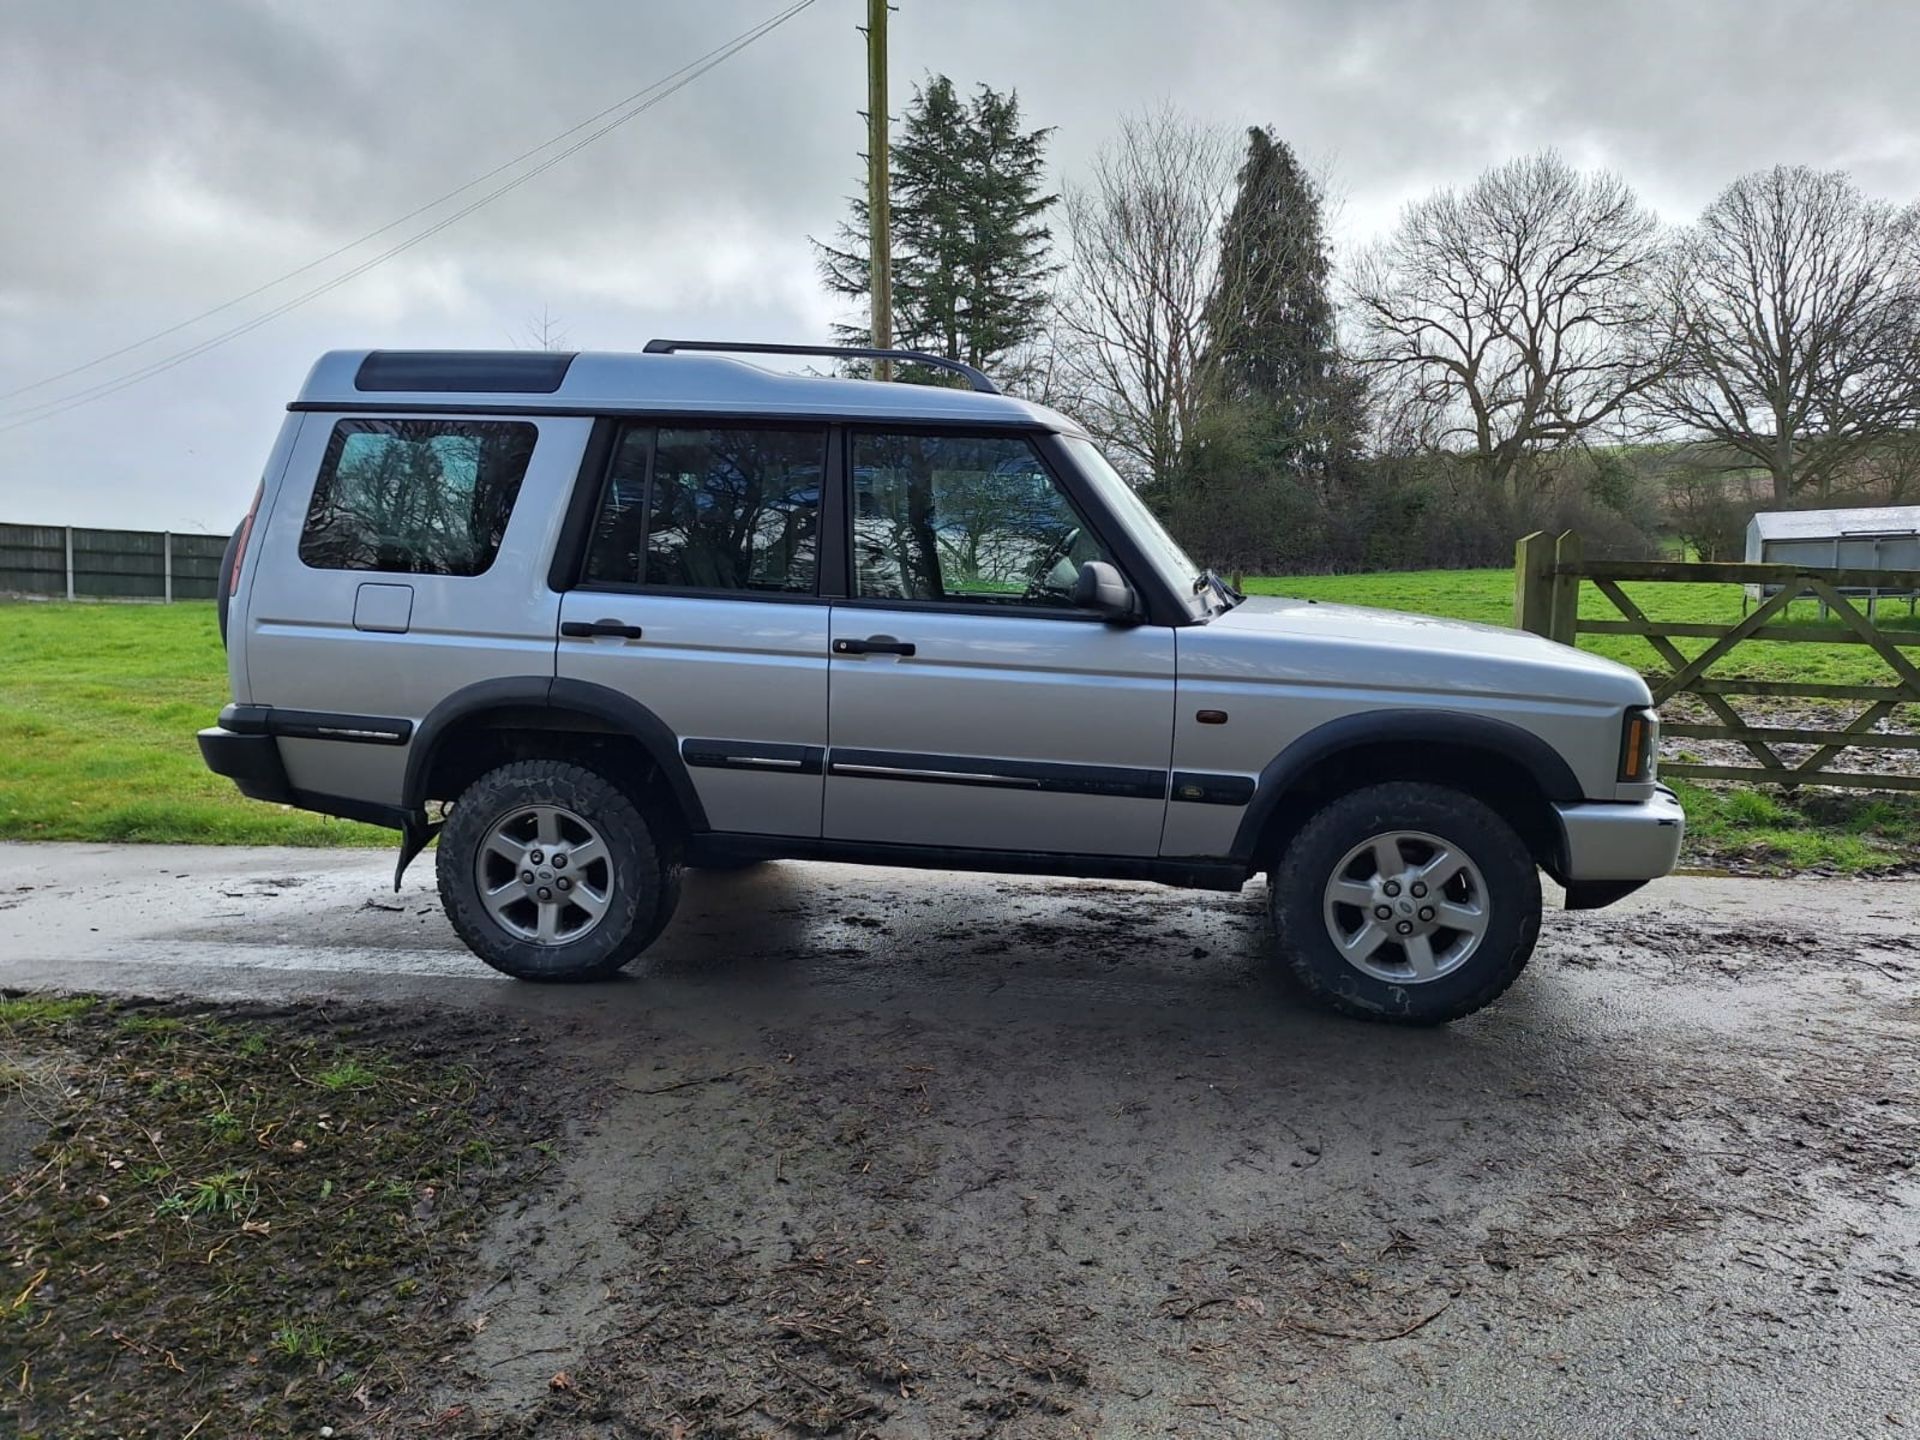 2003 LANDROVER DISCOVERY TD5 GS